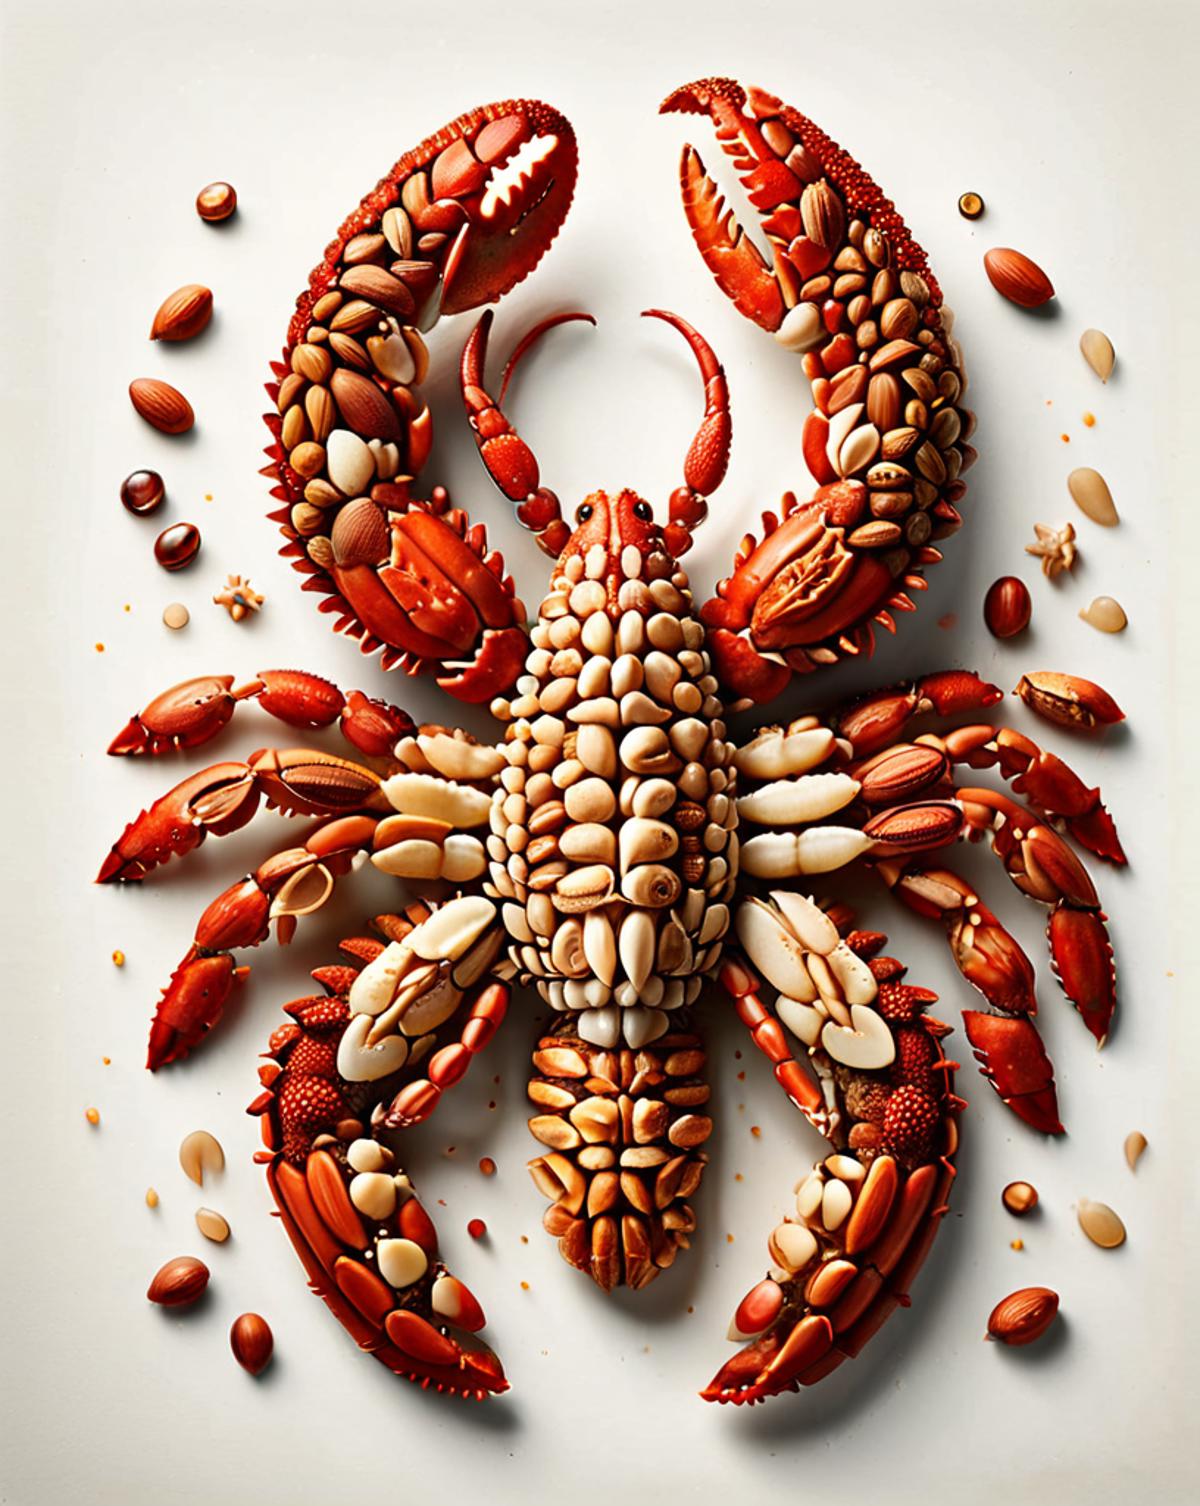 Crab made of nuts and shells in various colors